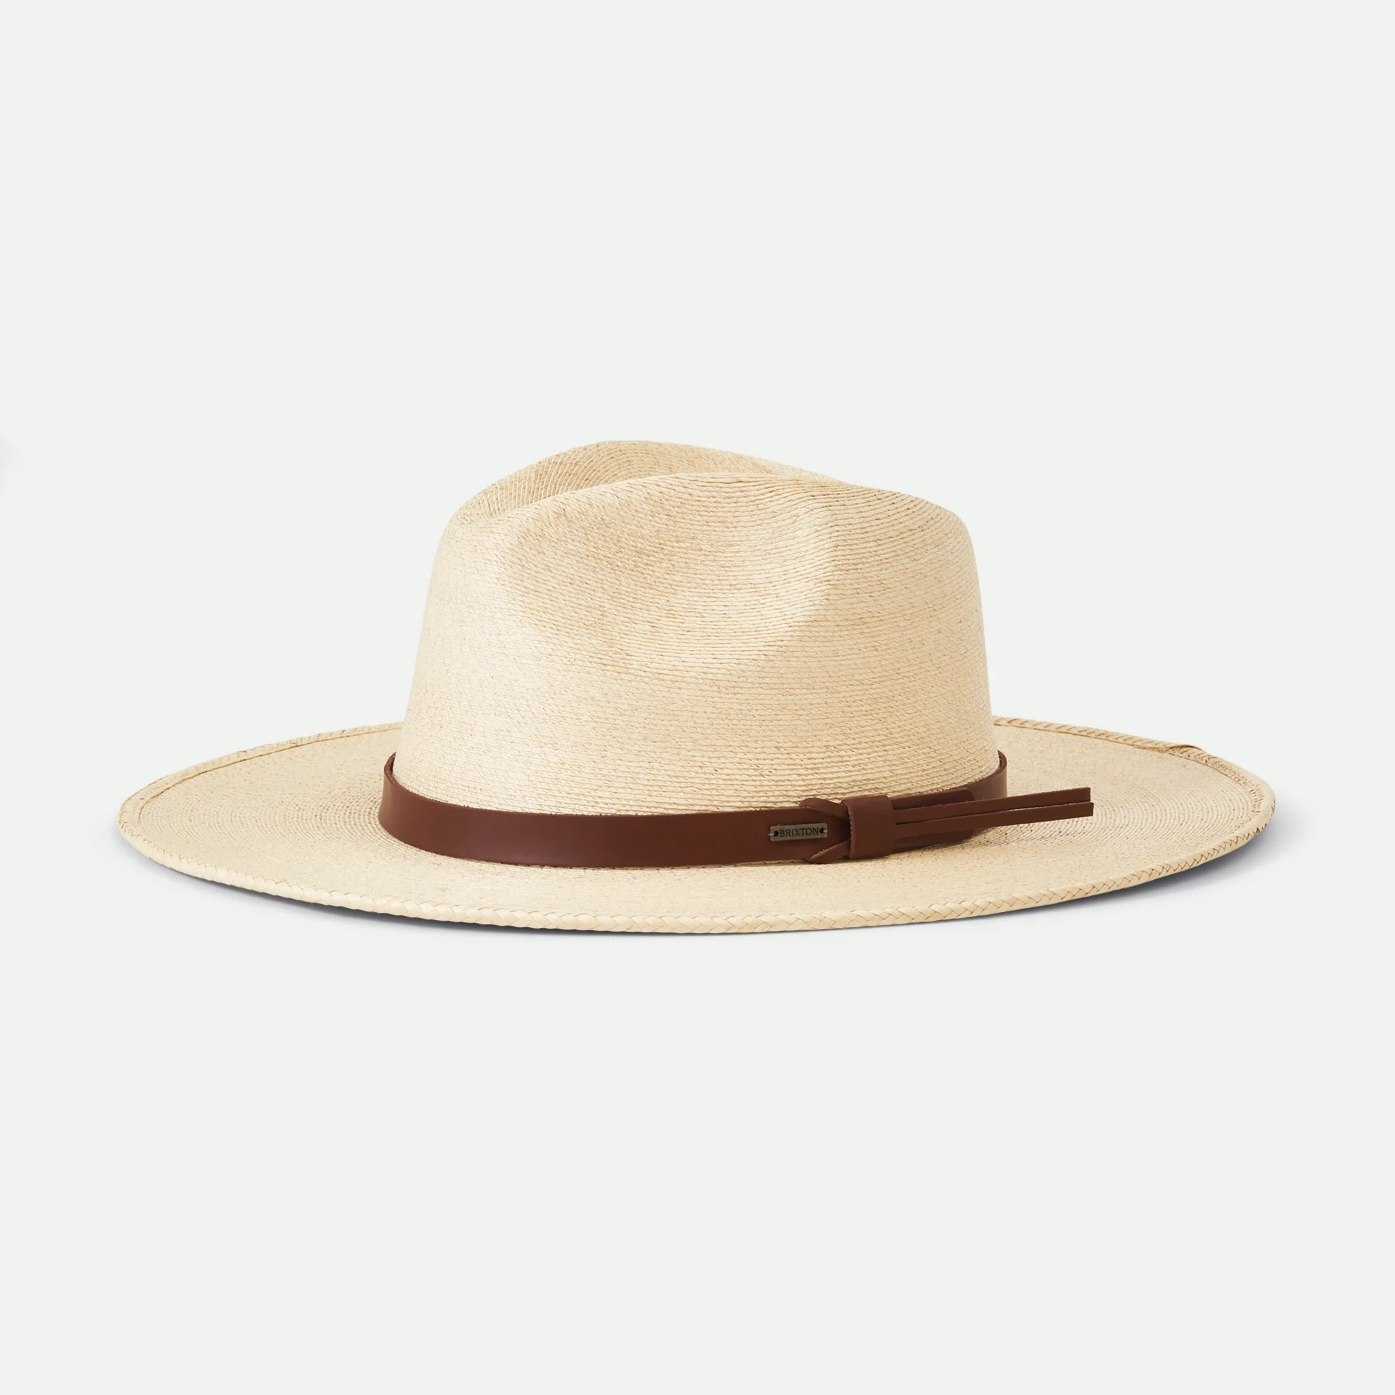 Gotstyle Fashion - Brixton Hats Field Proper Straw Hat with Leather Band - Natural